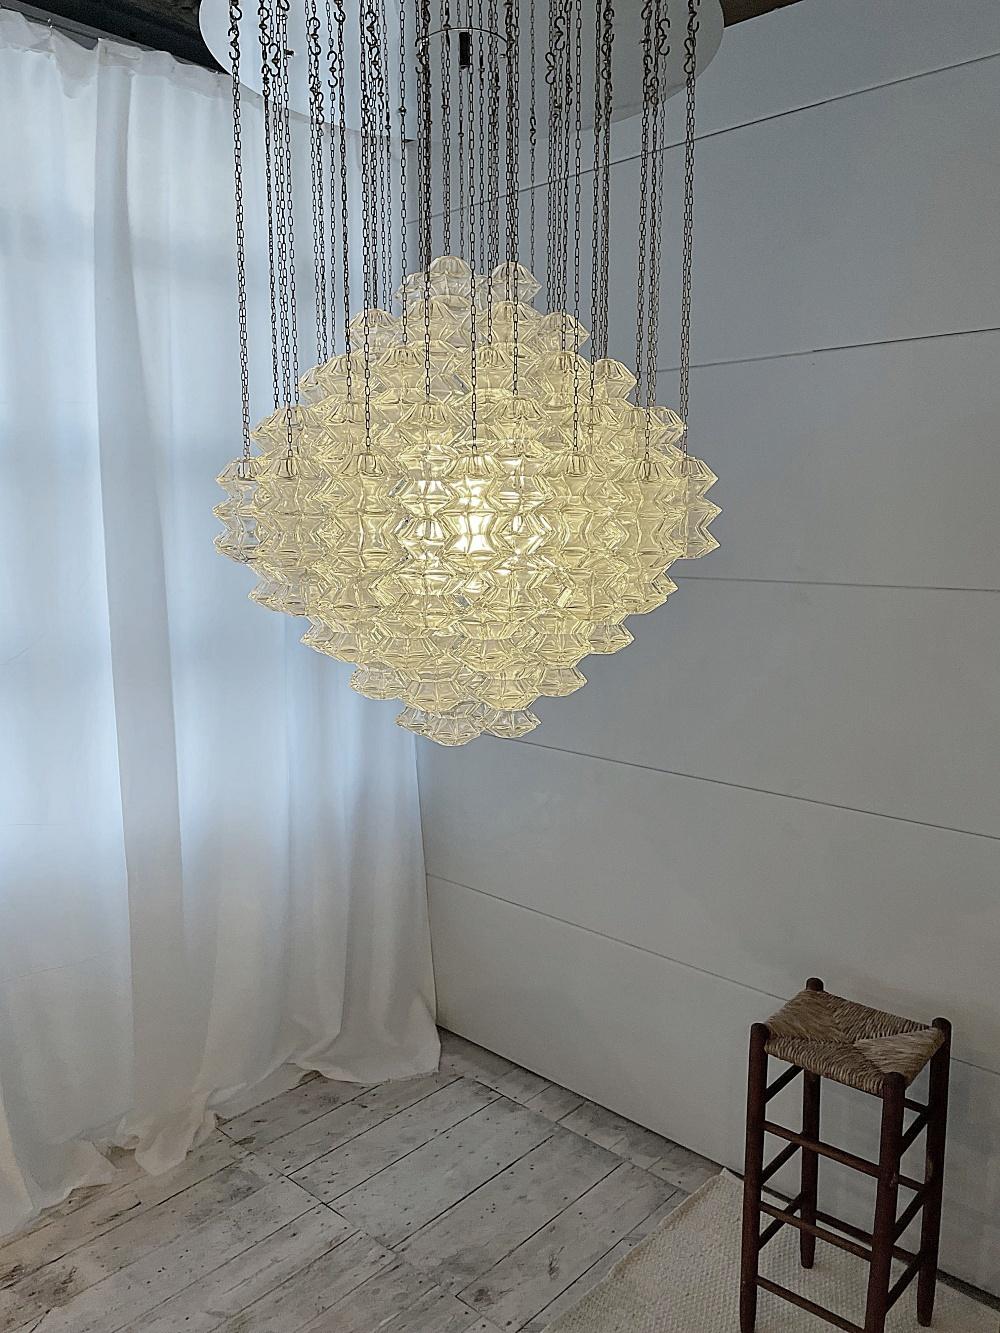 Impressive Mid-Century Modern crystal glass 'Pagode' pendant chandelier, manufactured by J.T. Kalmar in the 1960s. The light is in original condition with the original nickel plate and the hooks.
This model was one of the biggest 'Pagode' lights